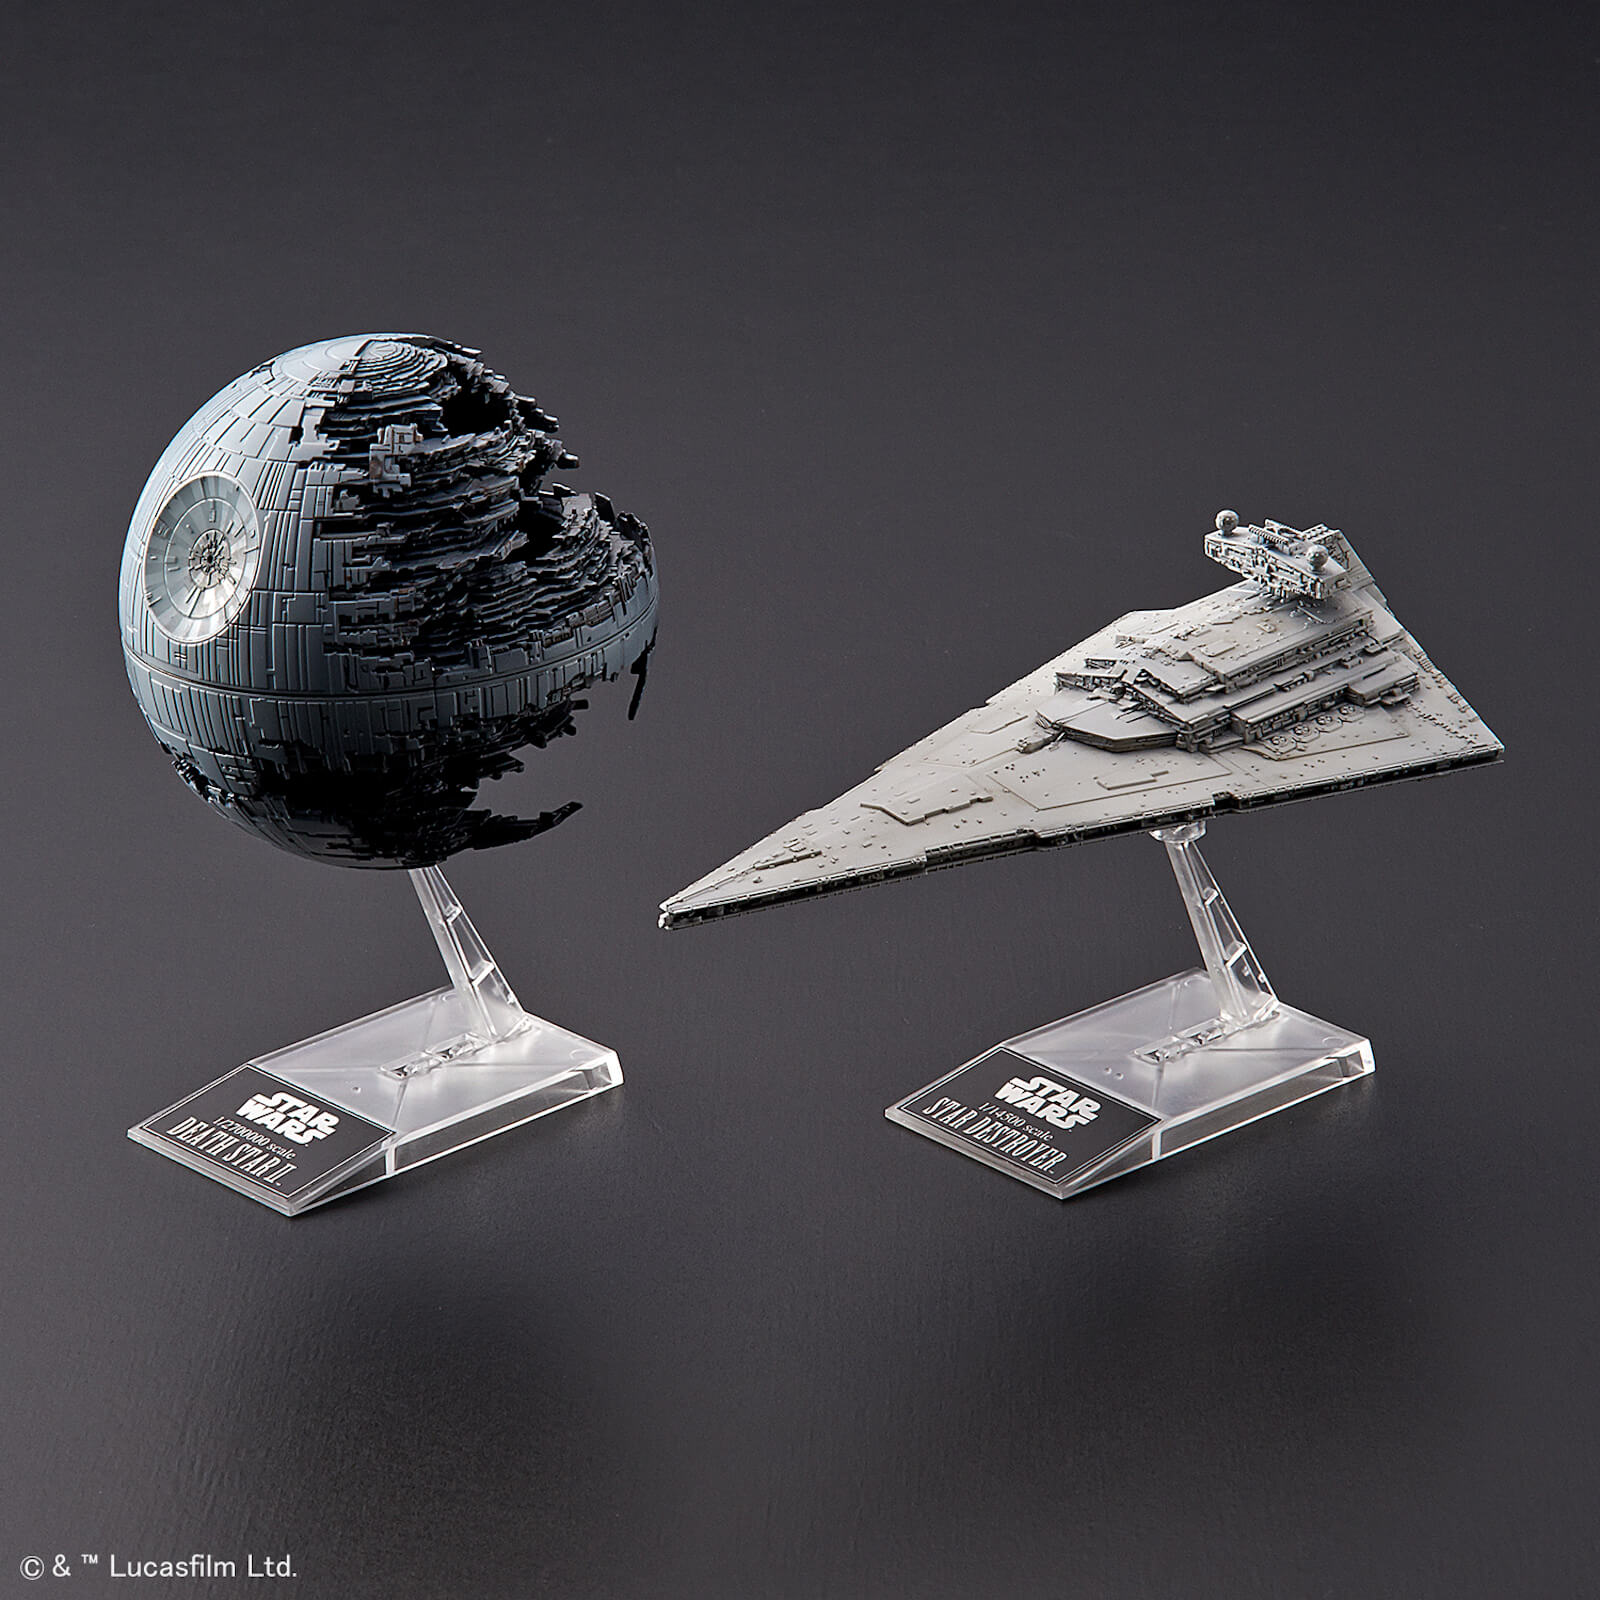 Revell Star Wars Death Star II and Imperial Star Destroyer Model